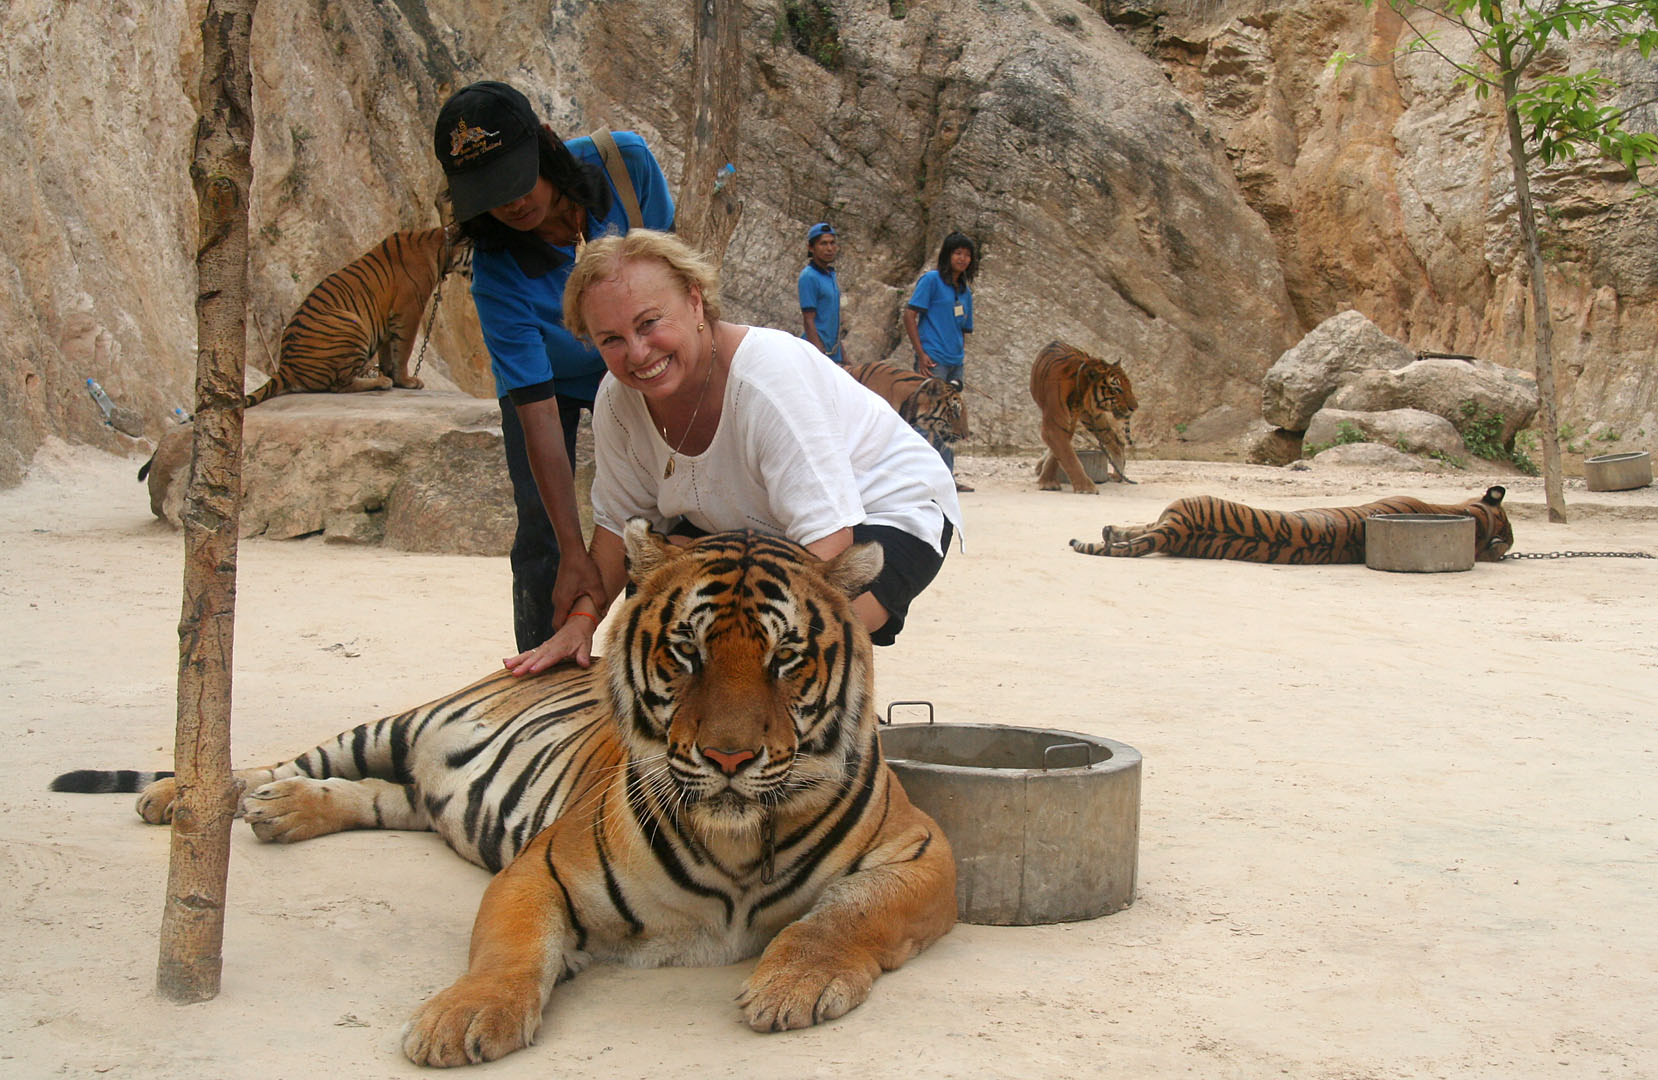 1 Setting up for a photo in the Tiger Temple